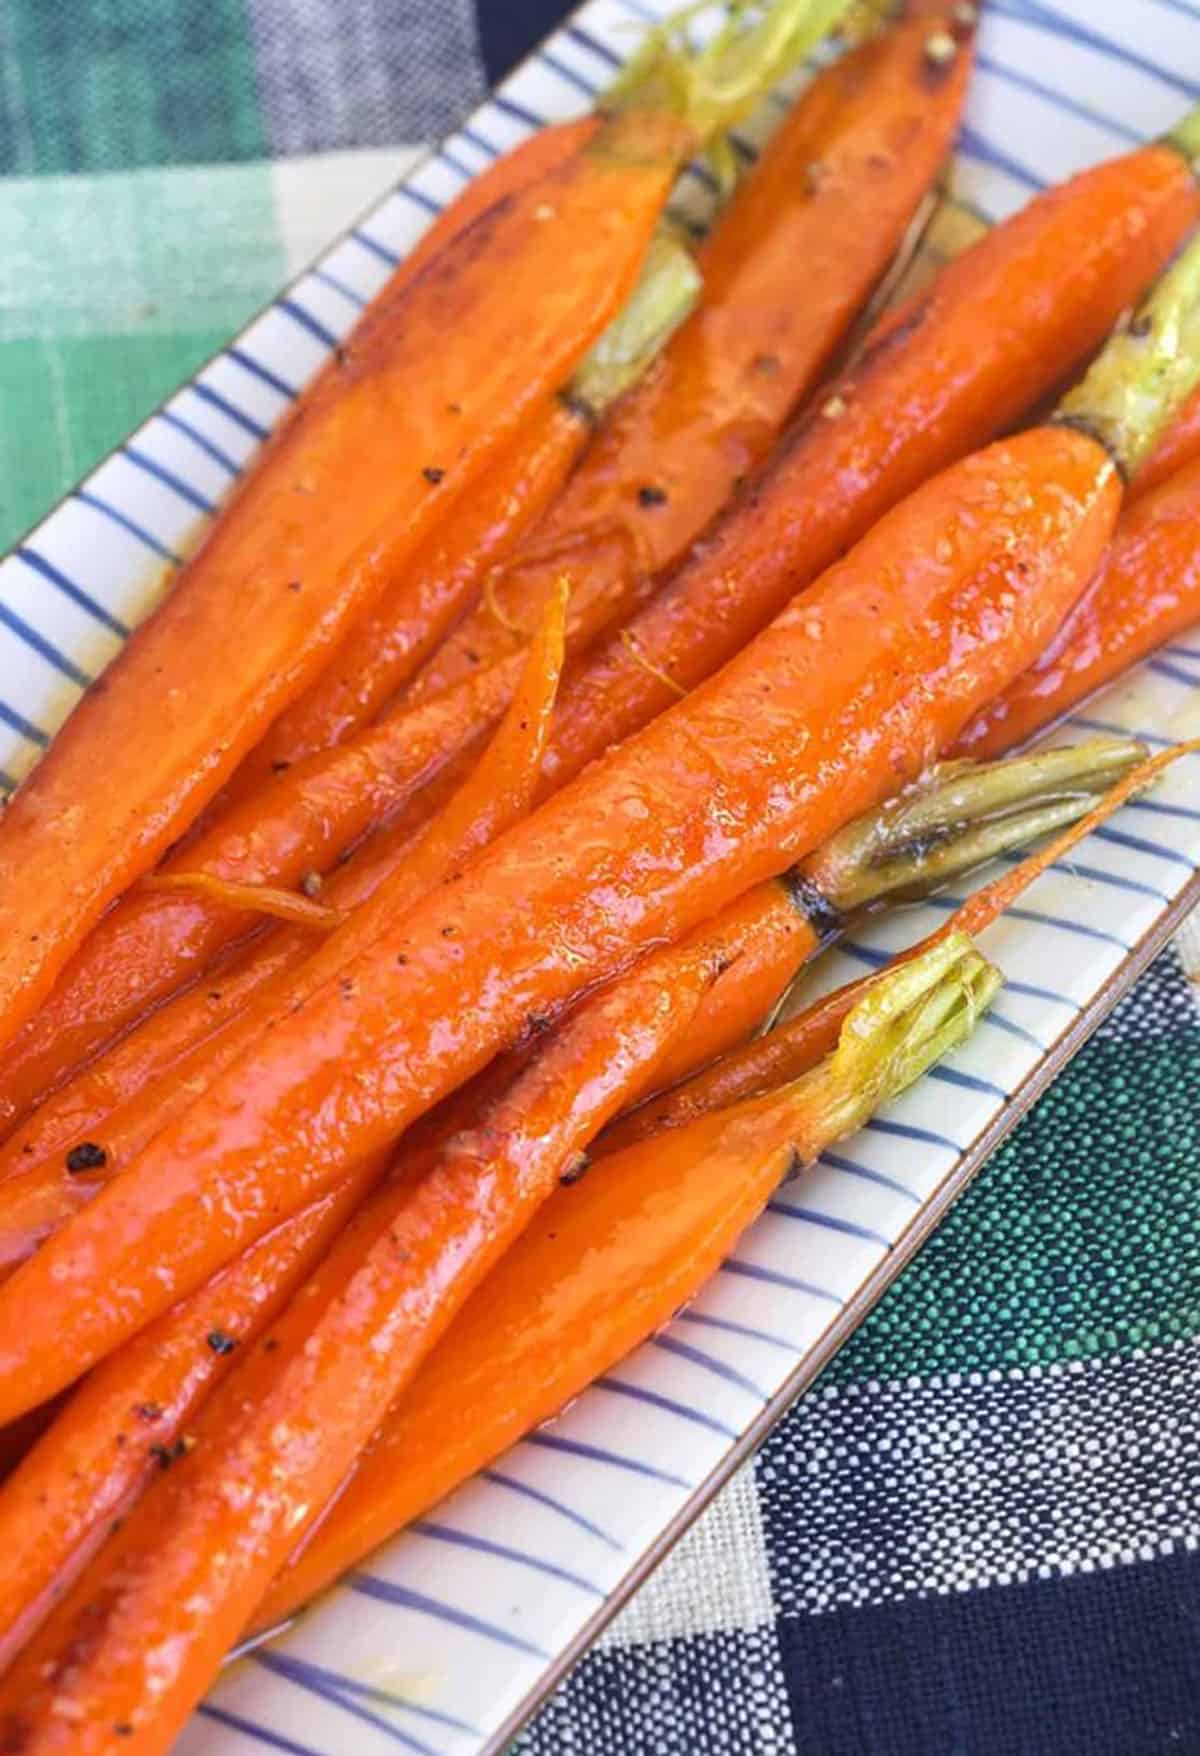 A striped plate is topped with cooked carrots.